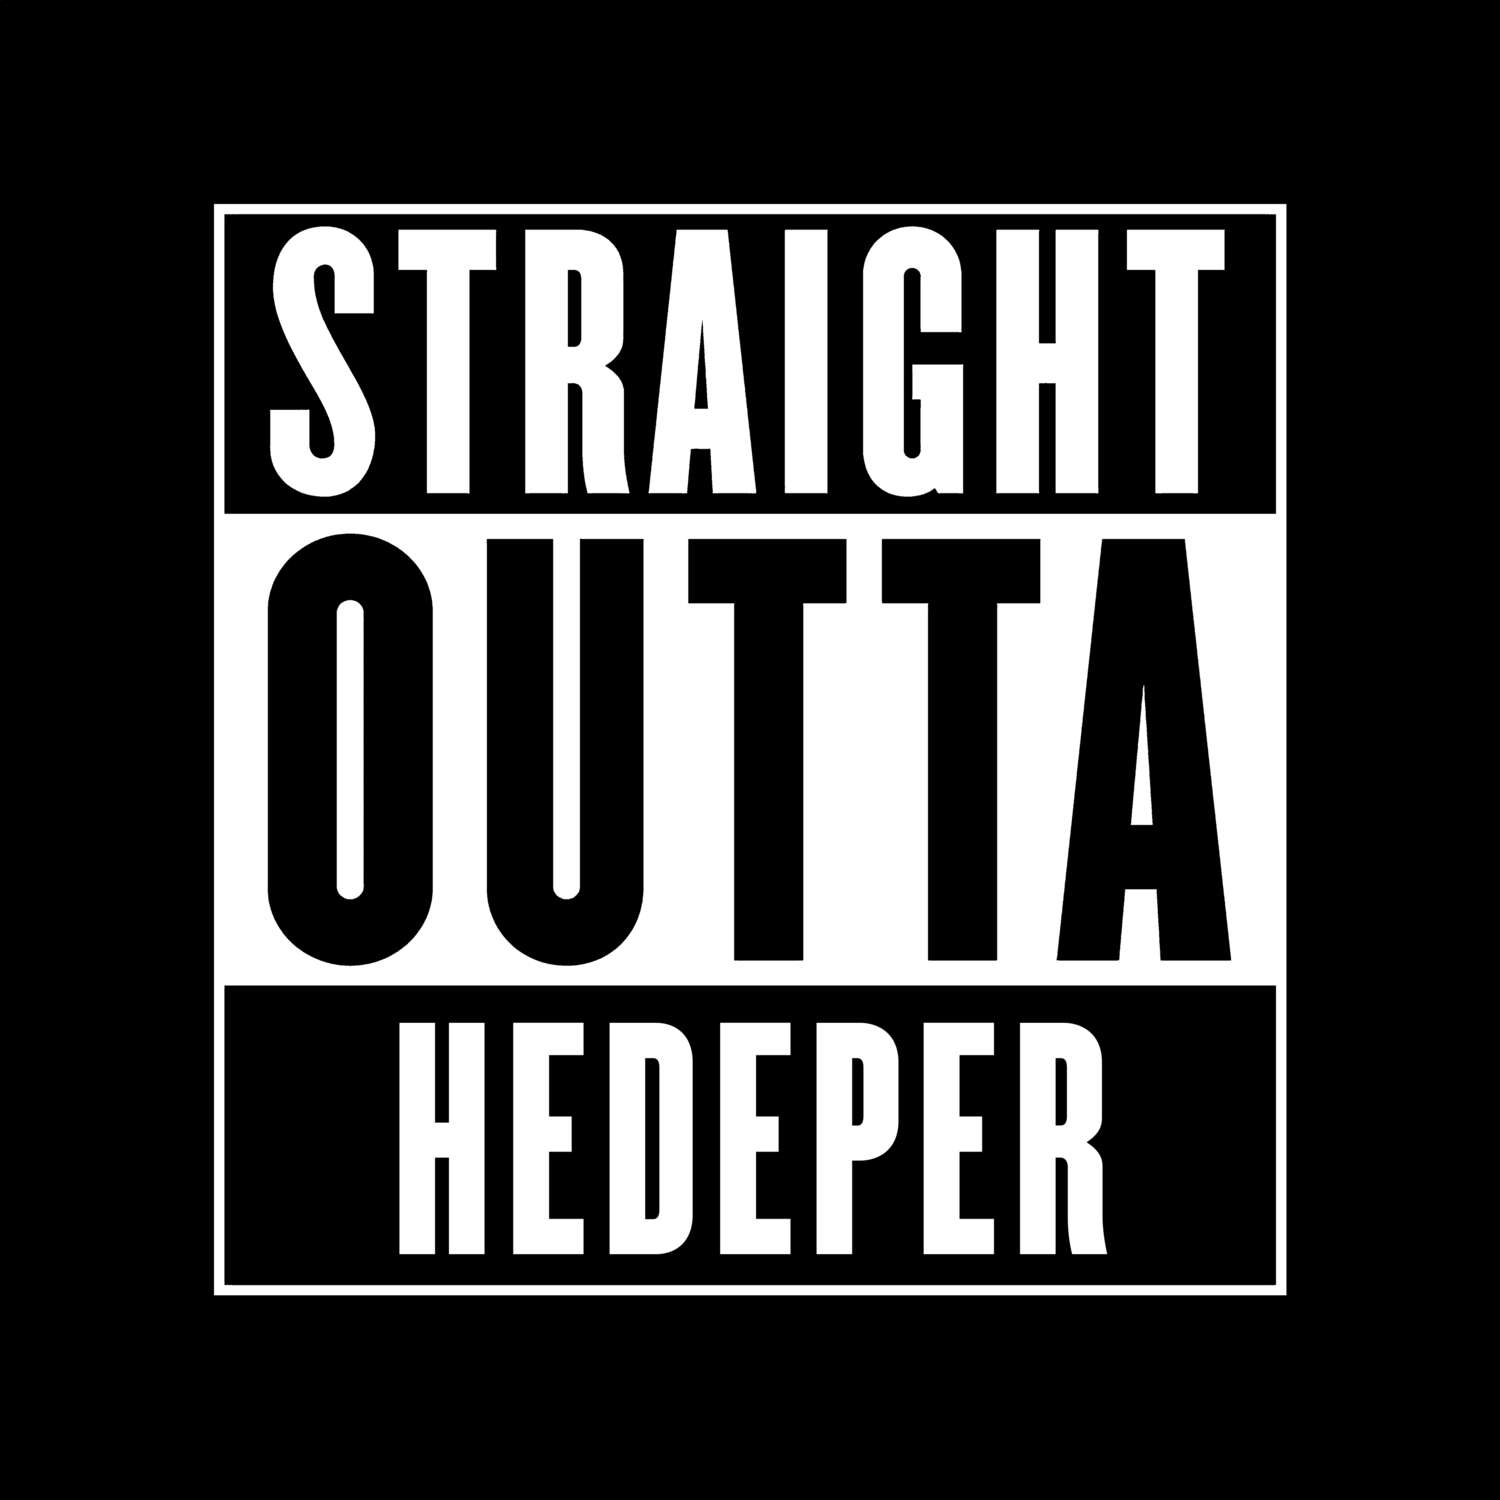 Hedeper T-Shirt »Straight Outta«